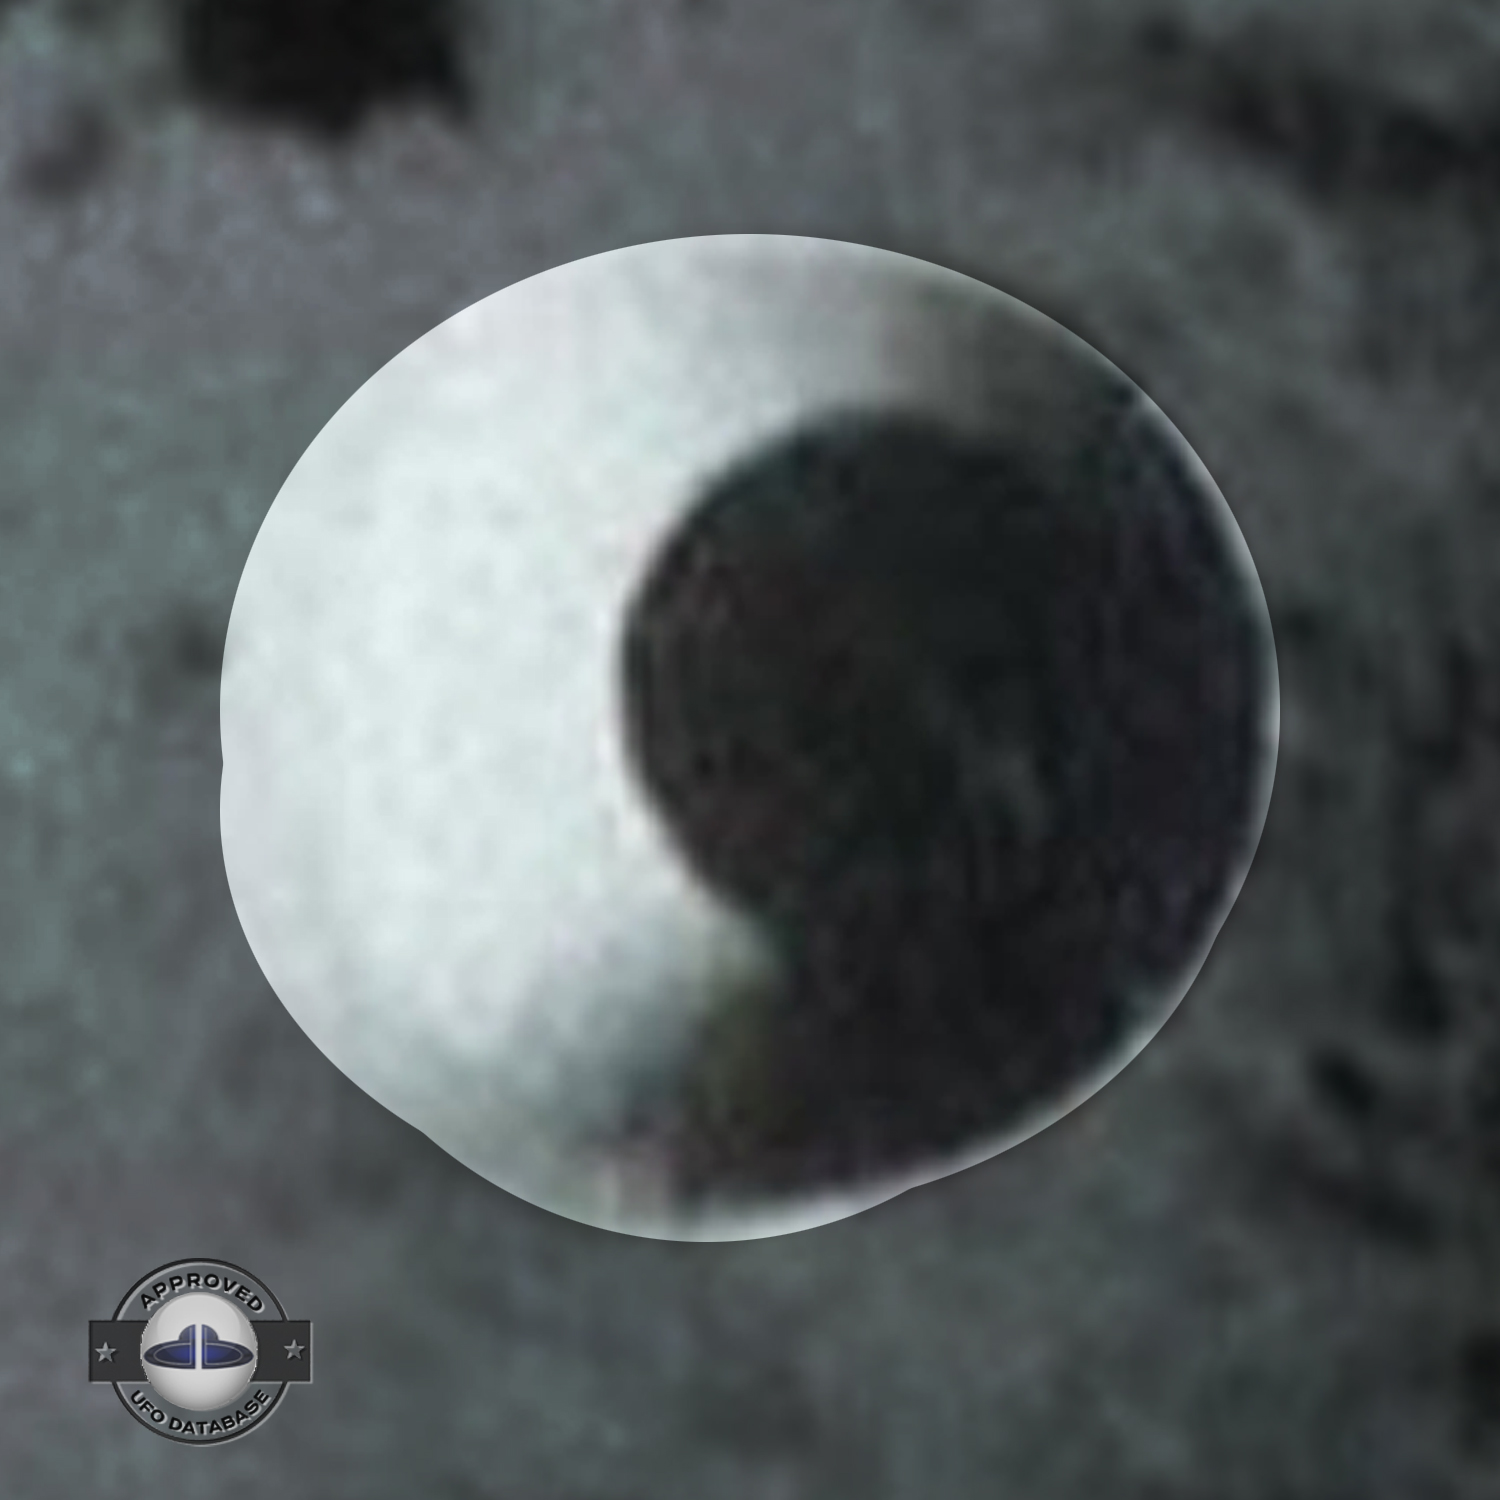 Rare UFO picture considering it was taken from airplane | Venezuela UFO Picture #146-6